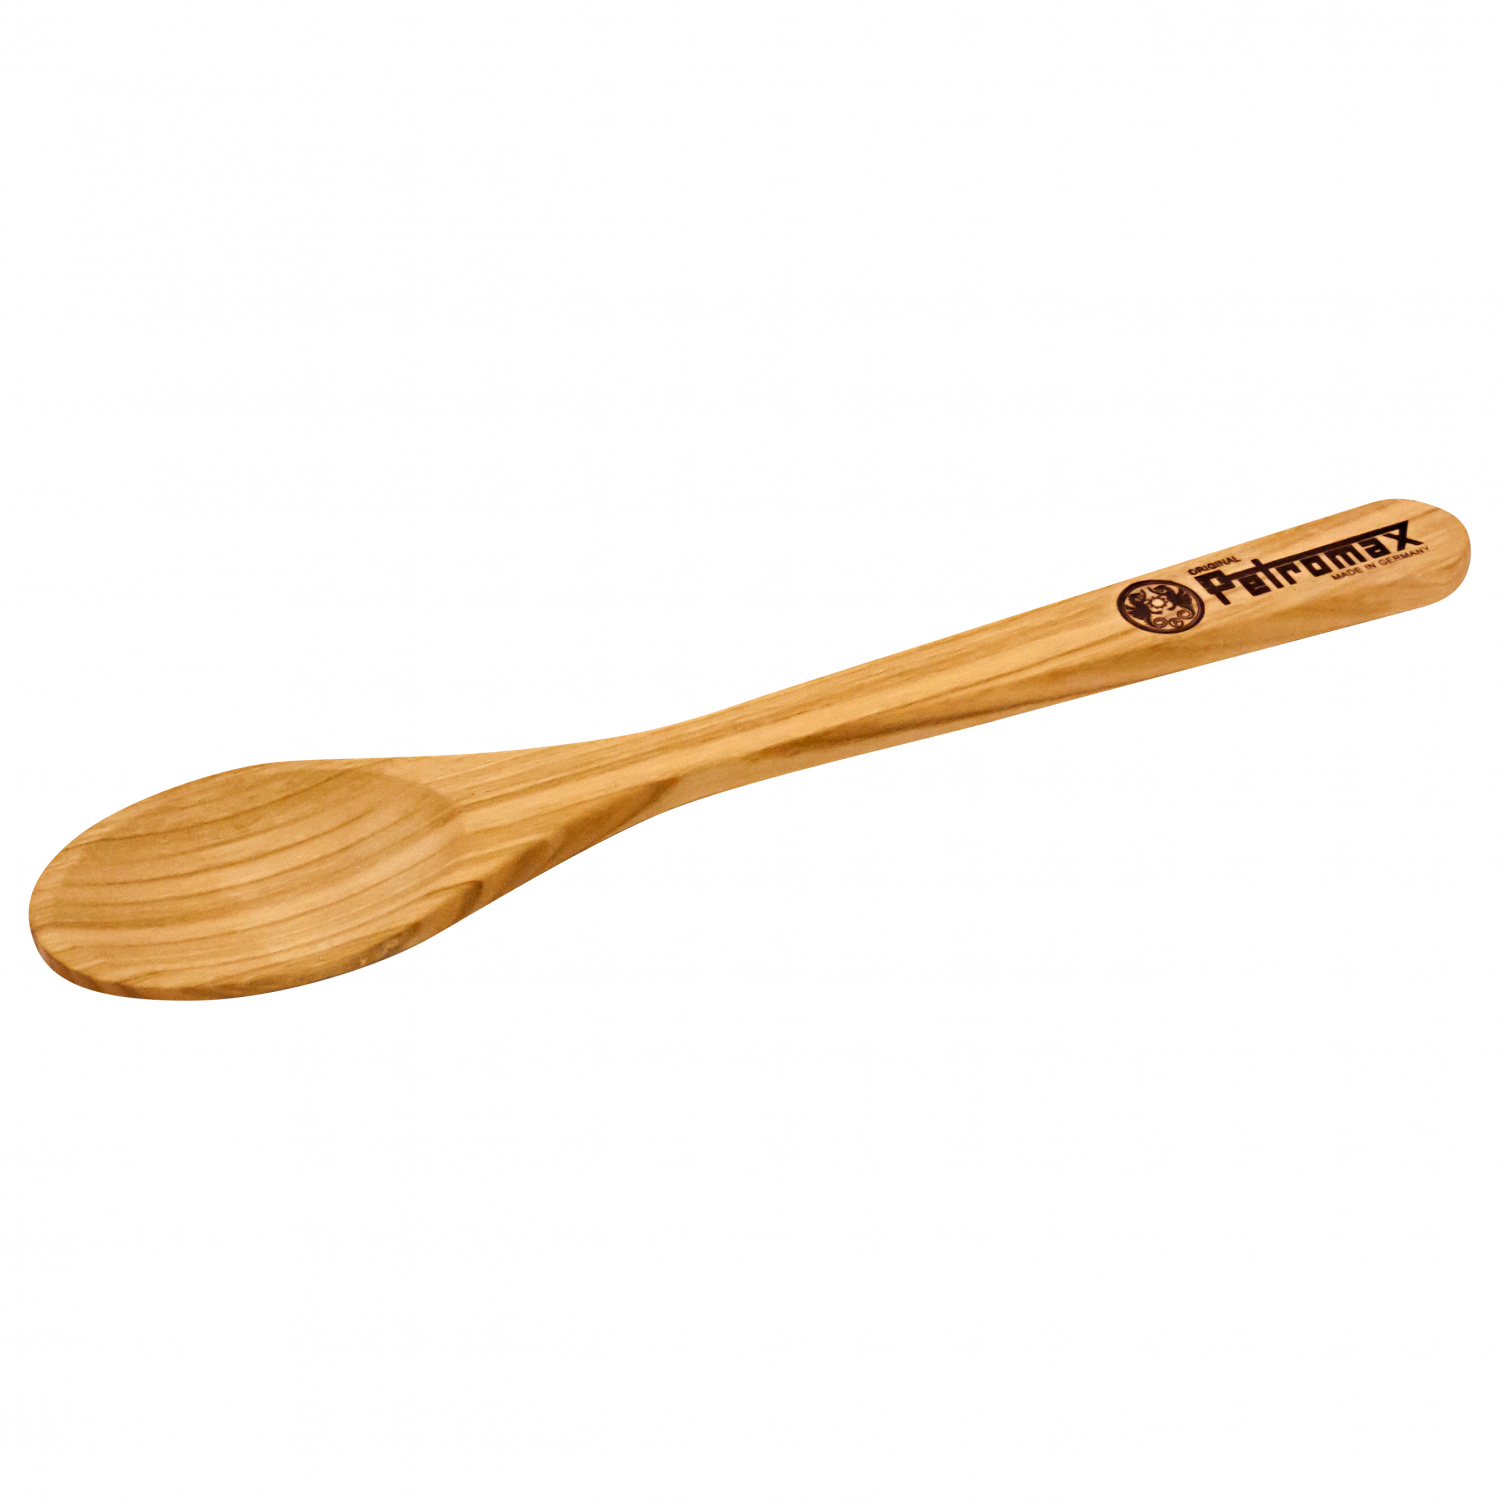 Petromax Wooden spoon (with branding) 